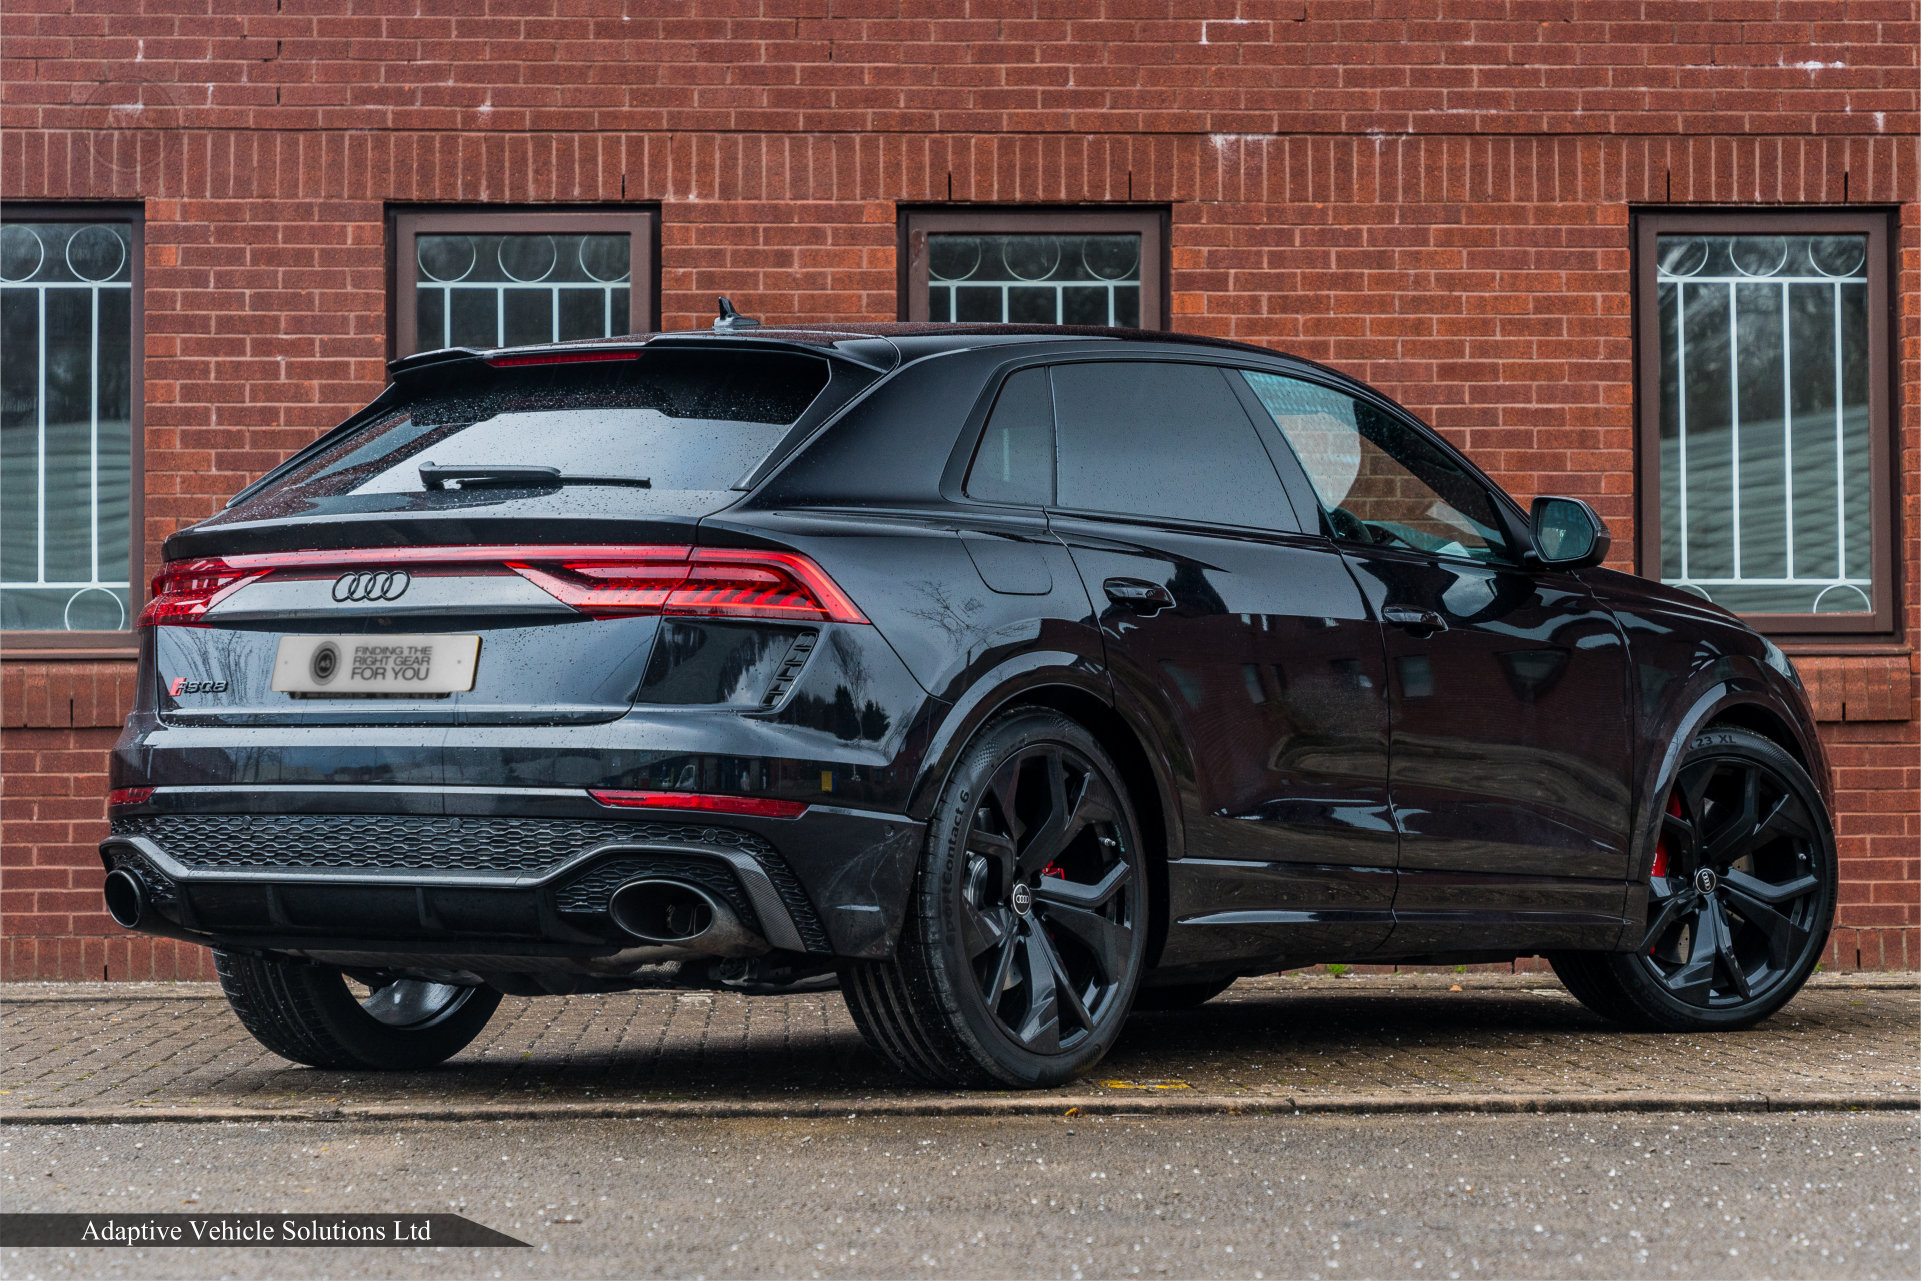 2021 Audi RSQ8 Carbon Edition Black with Black offside rear view